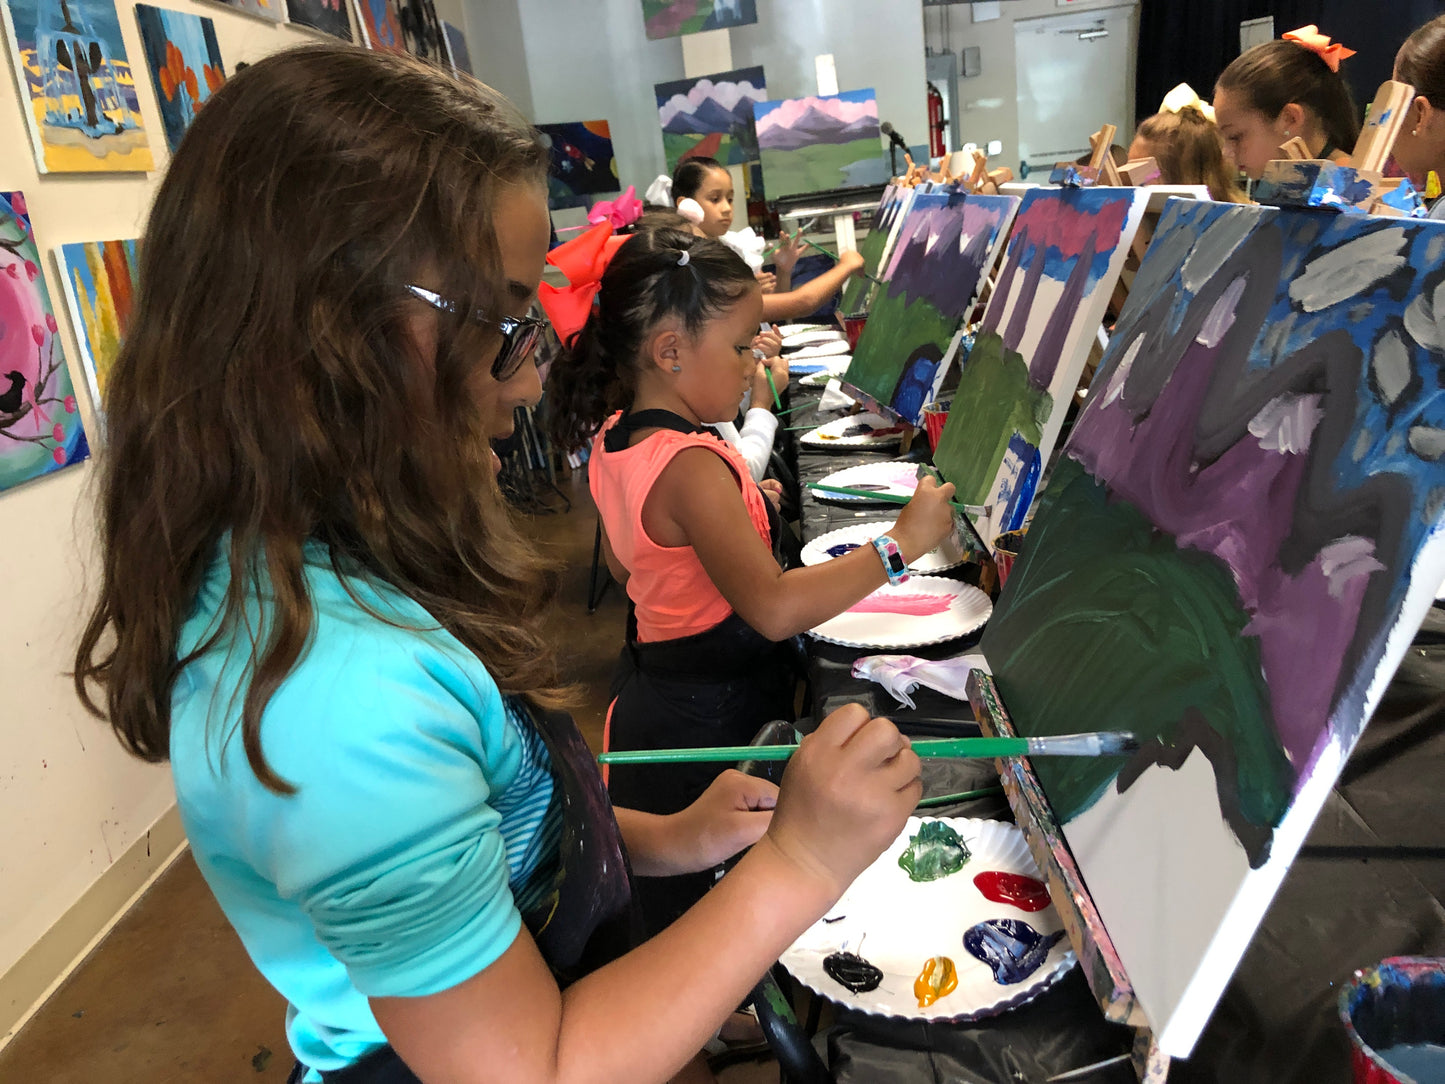 Wed, Dec 18, 4-6pm “A  Stroll in Winter” Public Houston Kids Painting Class